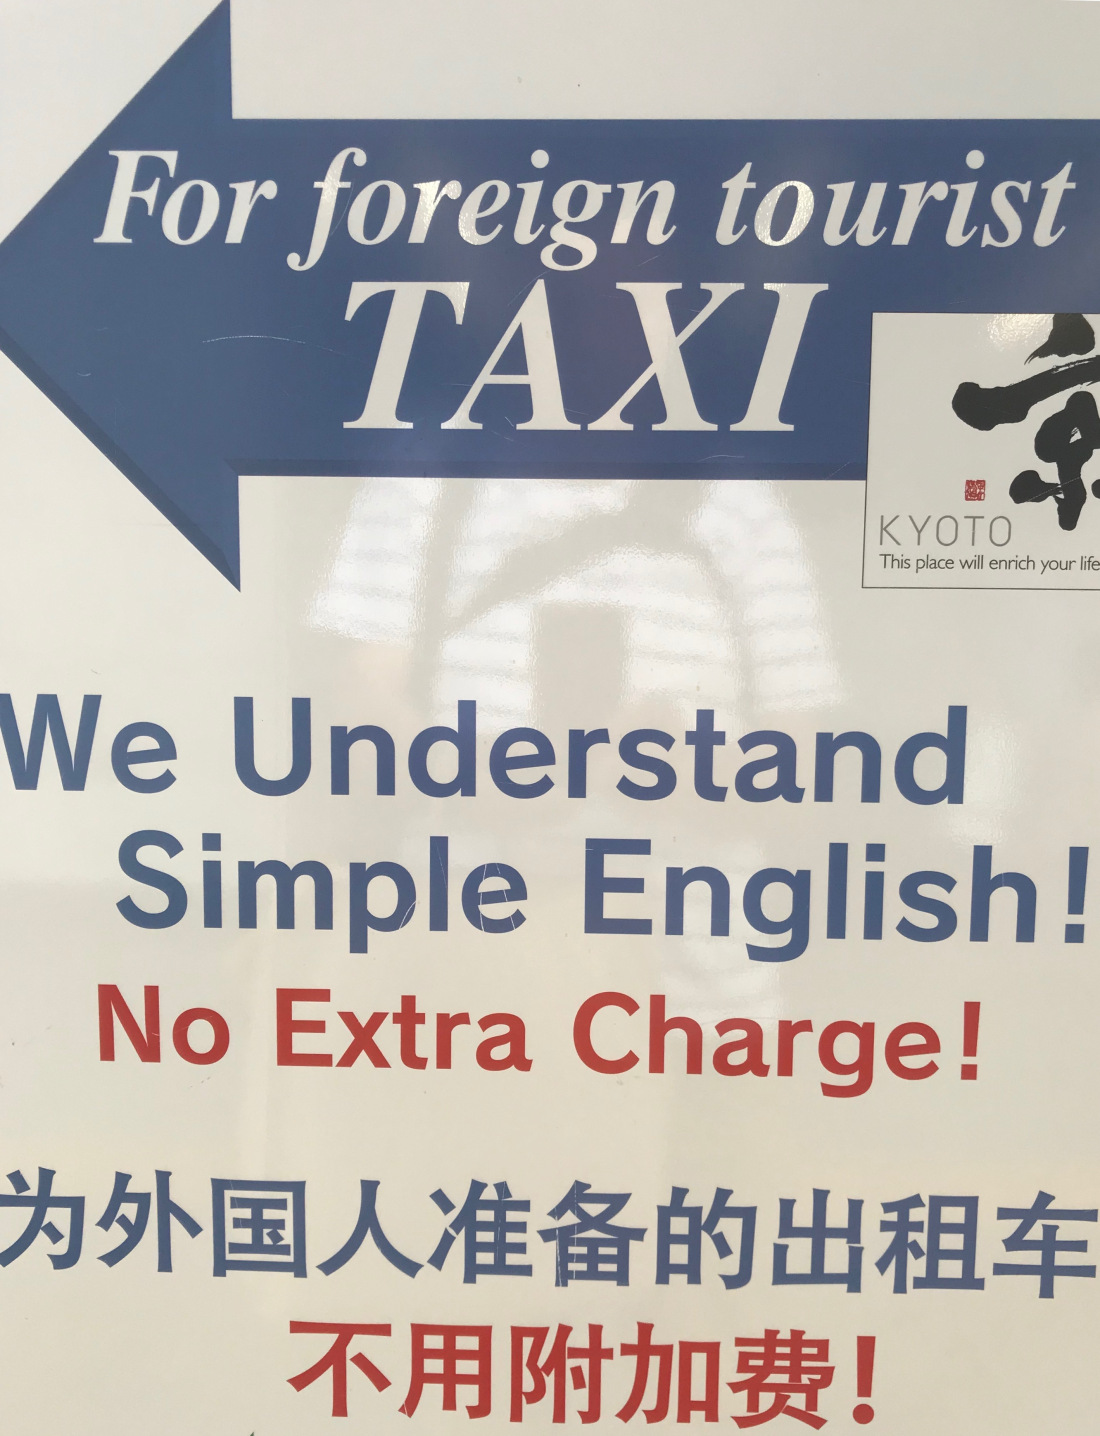 we understand english kyoto taxi